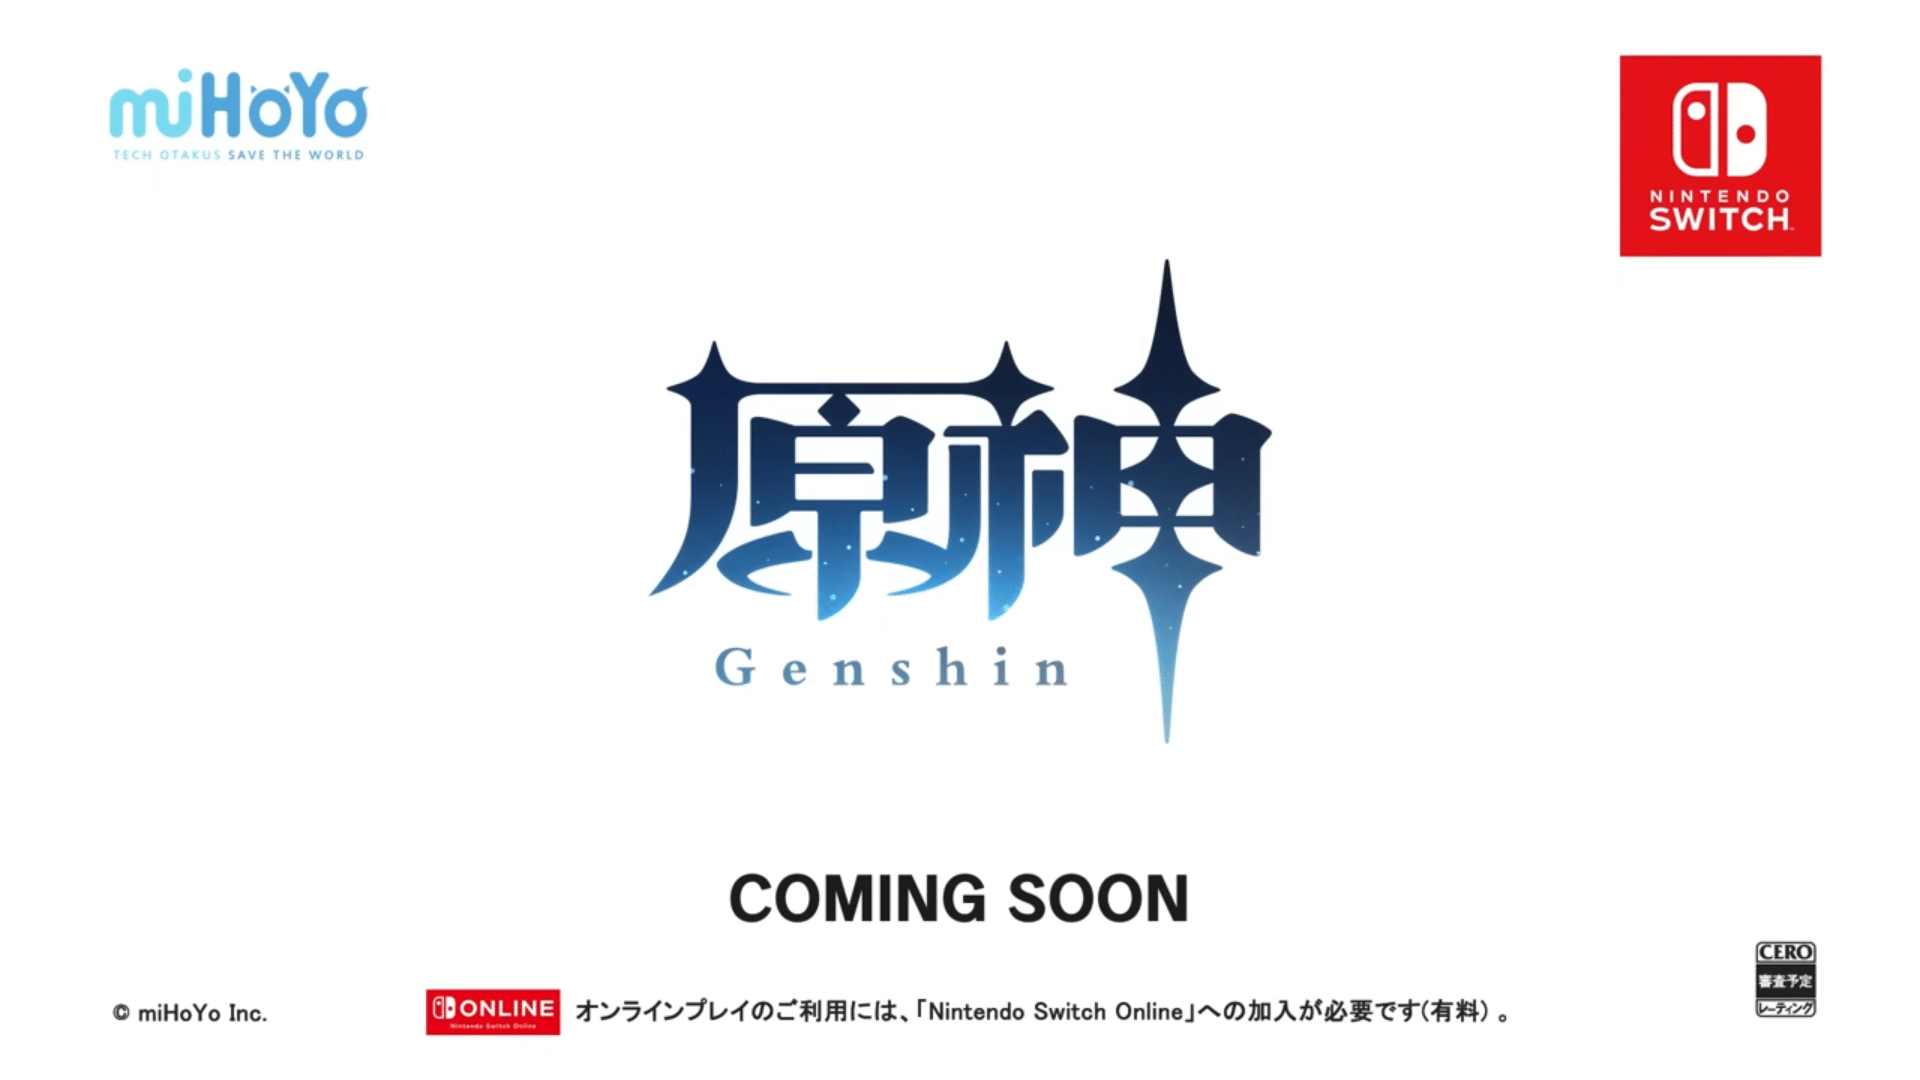 Will we get Genshin Impact on the Switch?